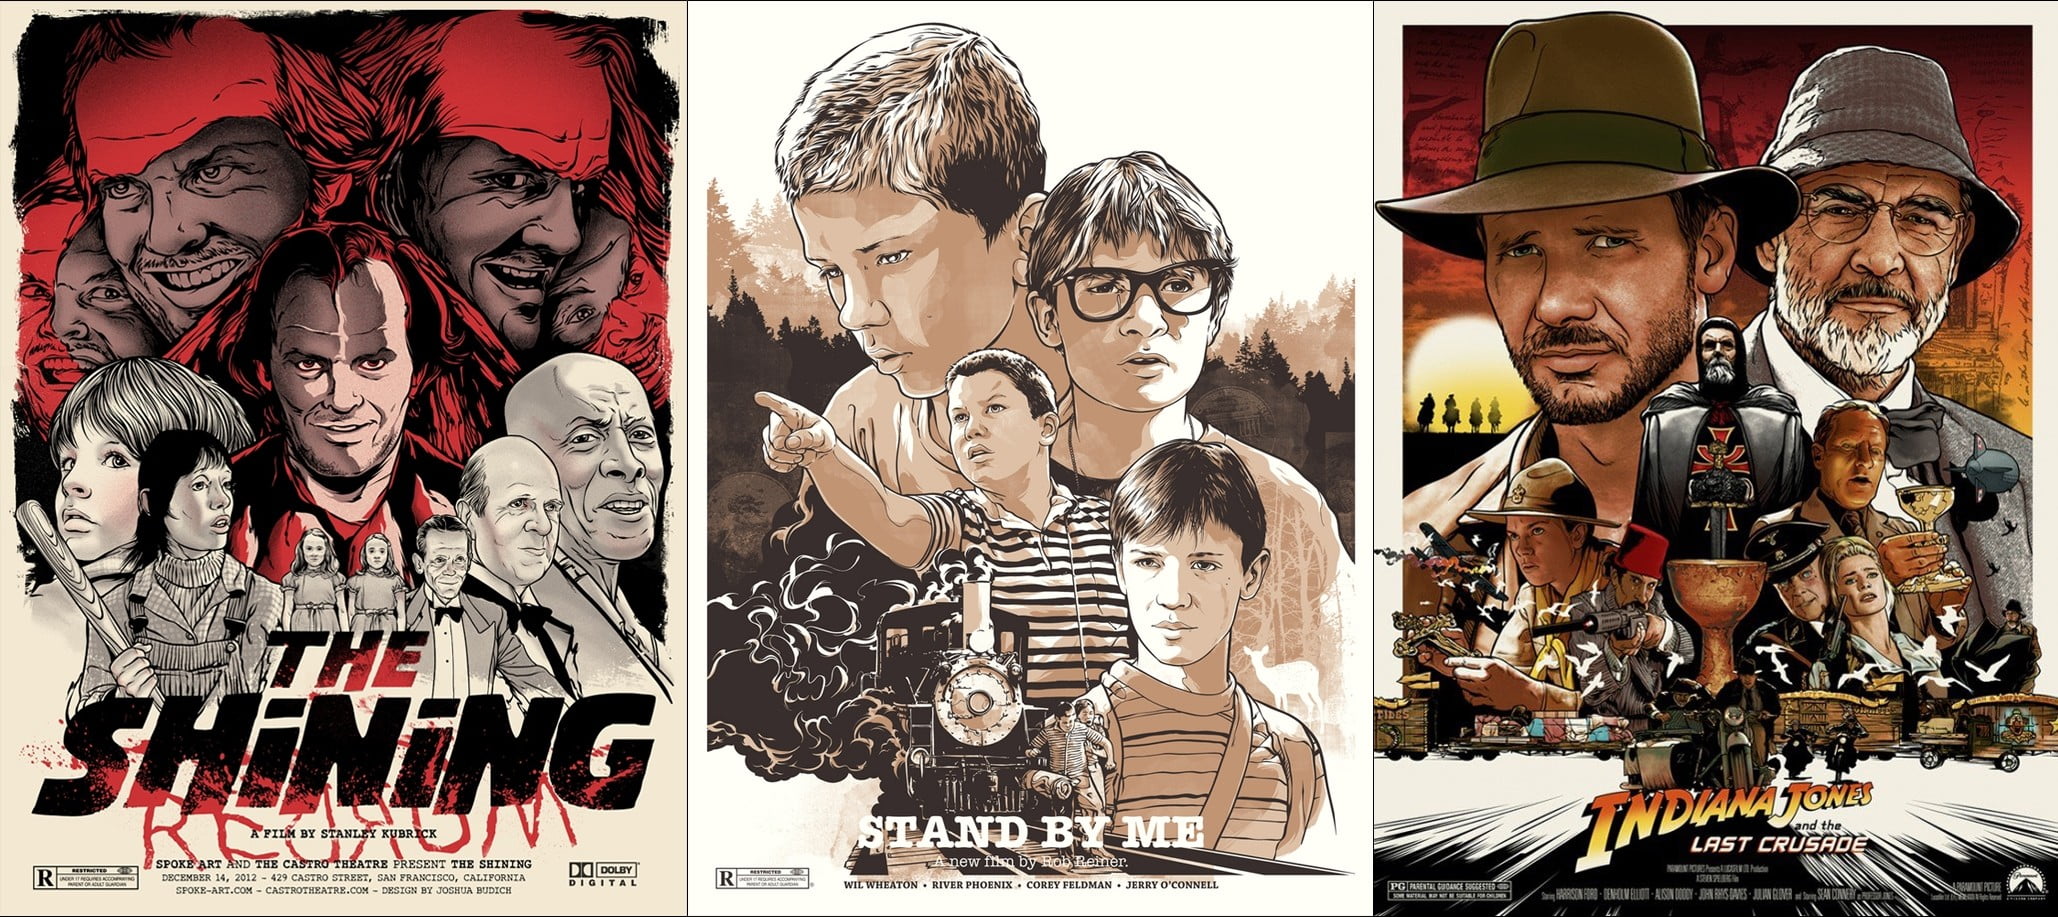 The Shining, Stand by Me, and Indiana Jones posters, joshua budich, movies, movie poster, Stanley Kubrick